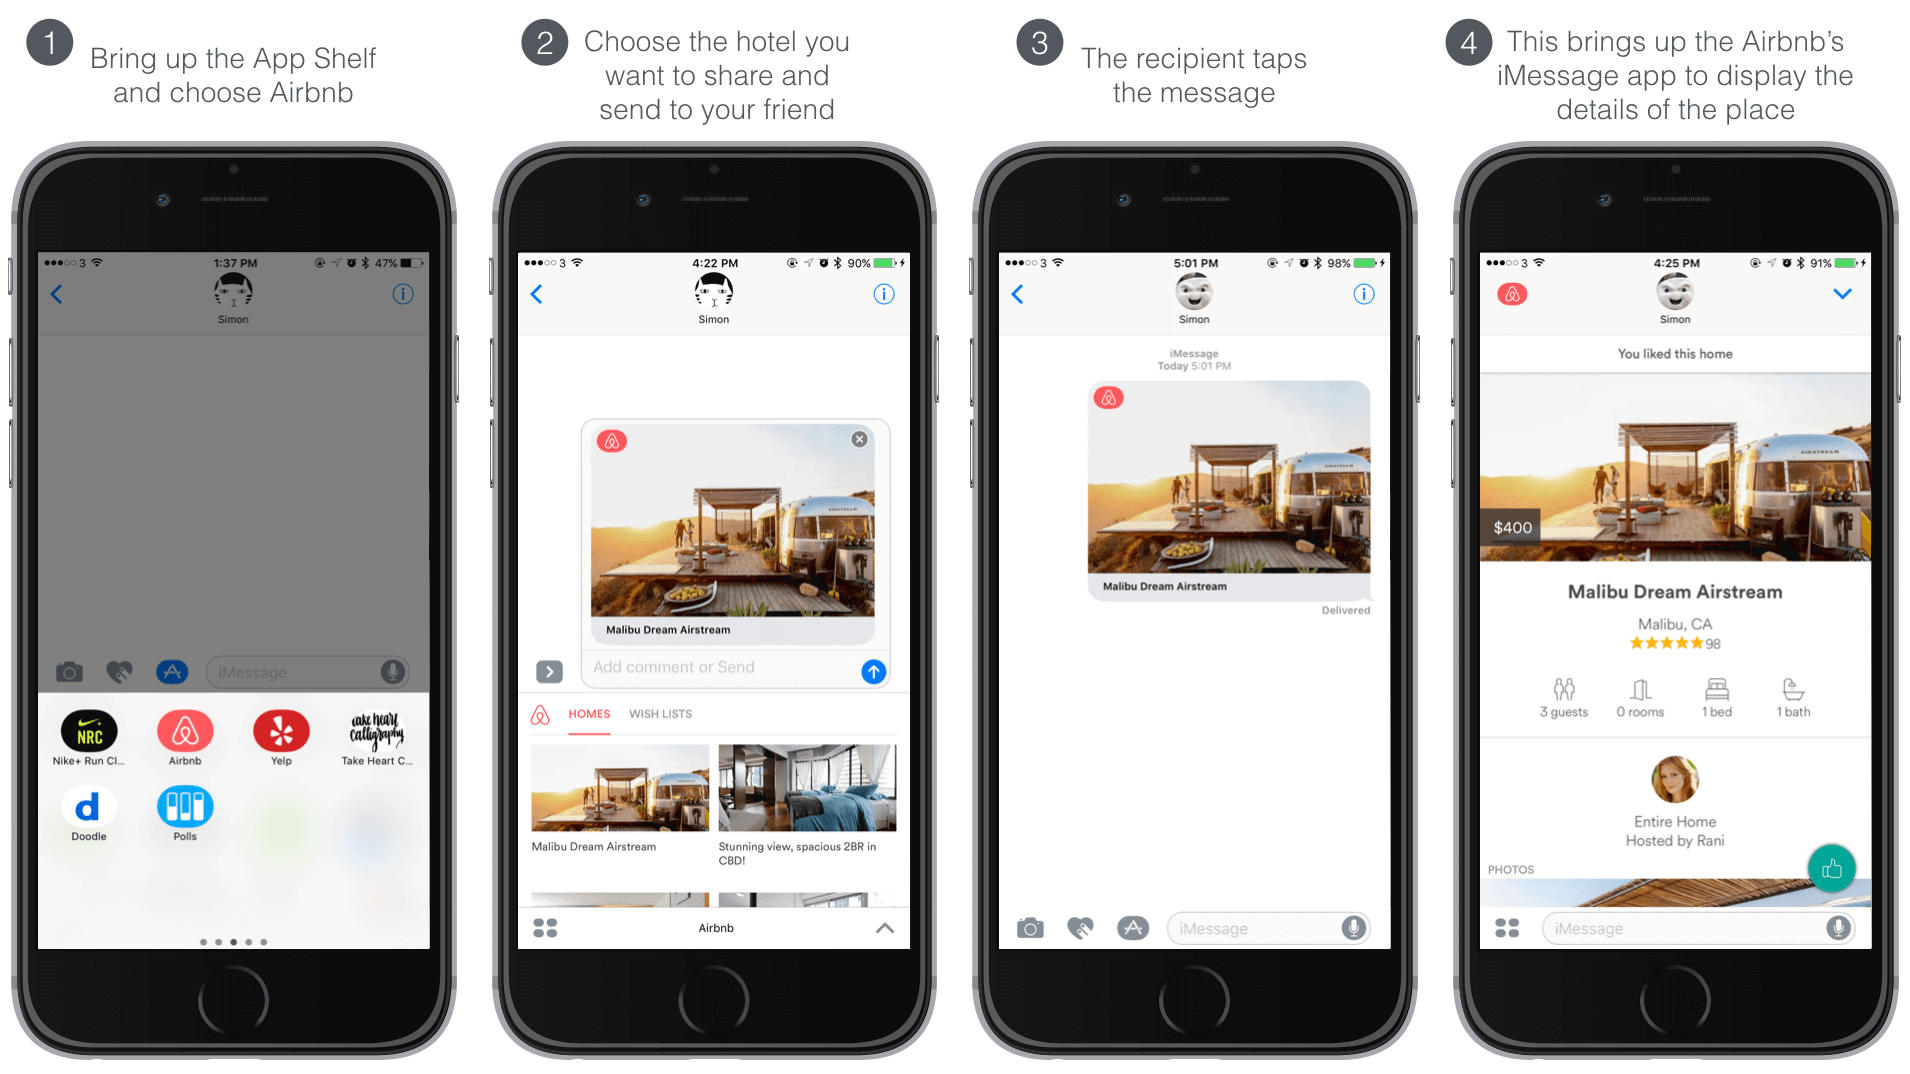 Figure 35.2. Sharing a lodging place using Airbnb's iMessage app